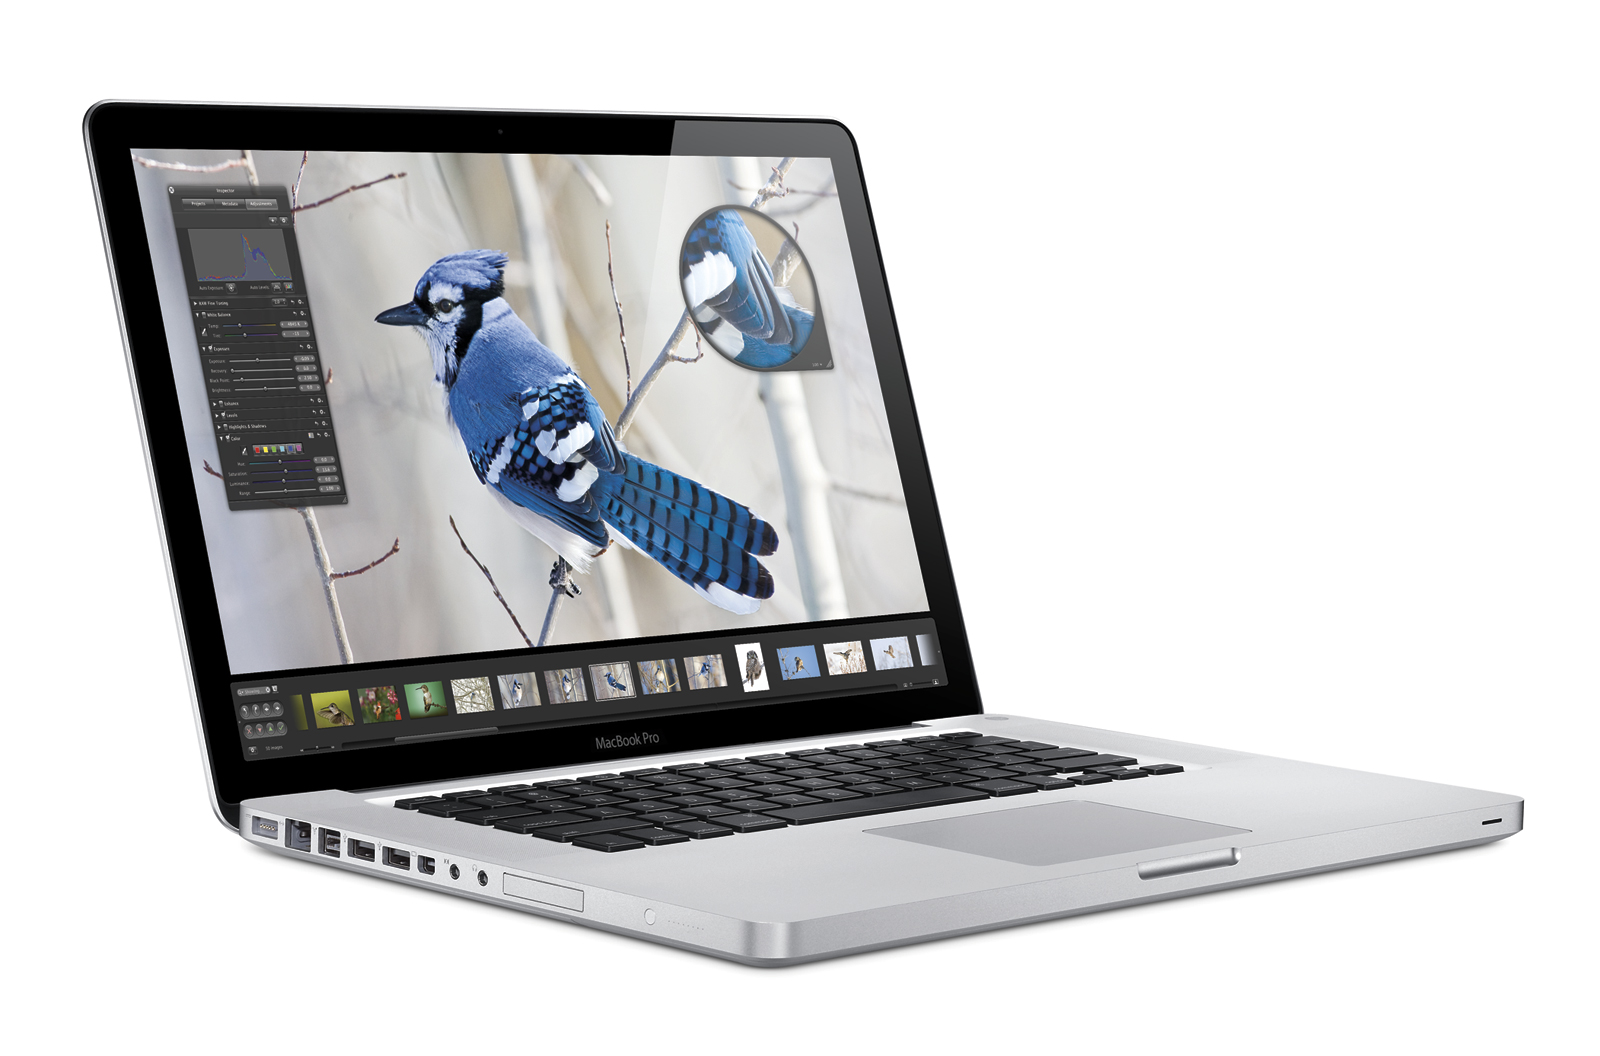 MacBook Pro 15-inch Late 2011 – Tech Specs, Release Date, and Price